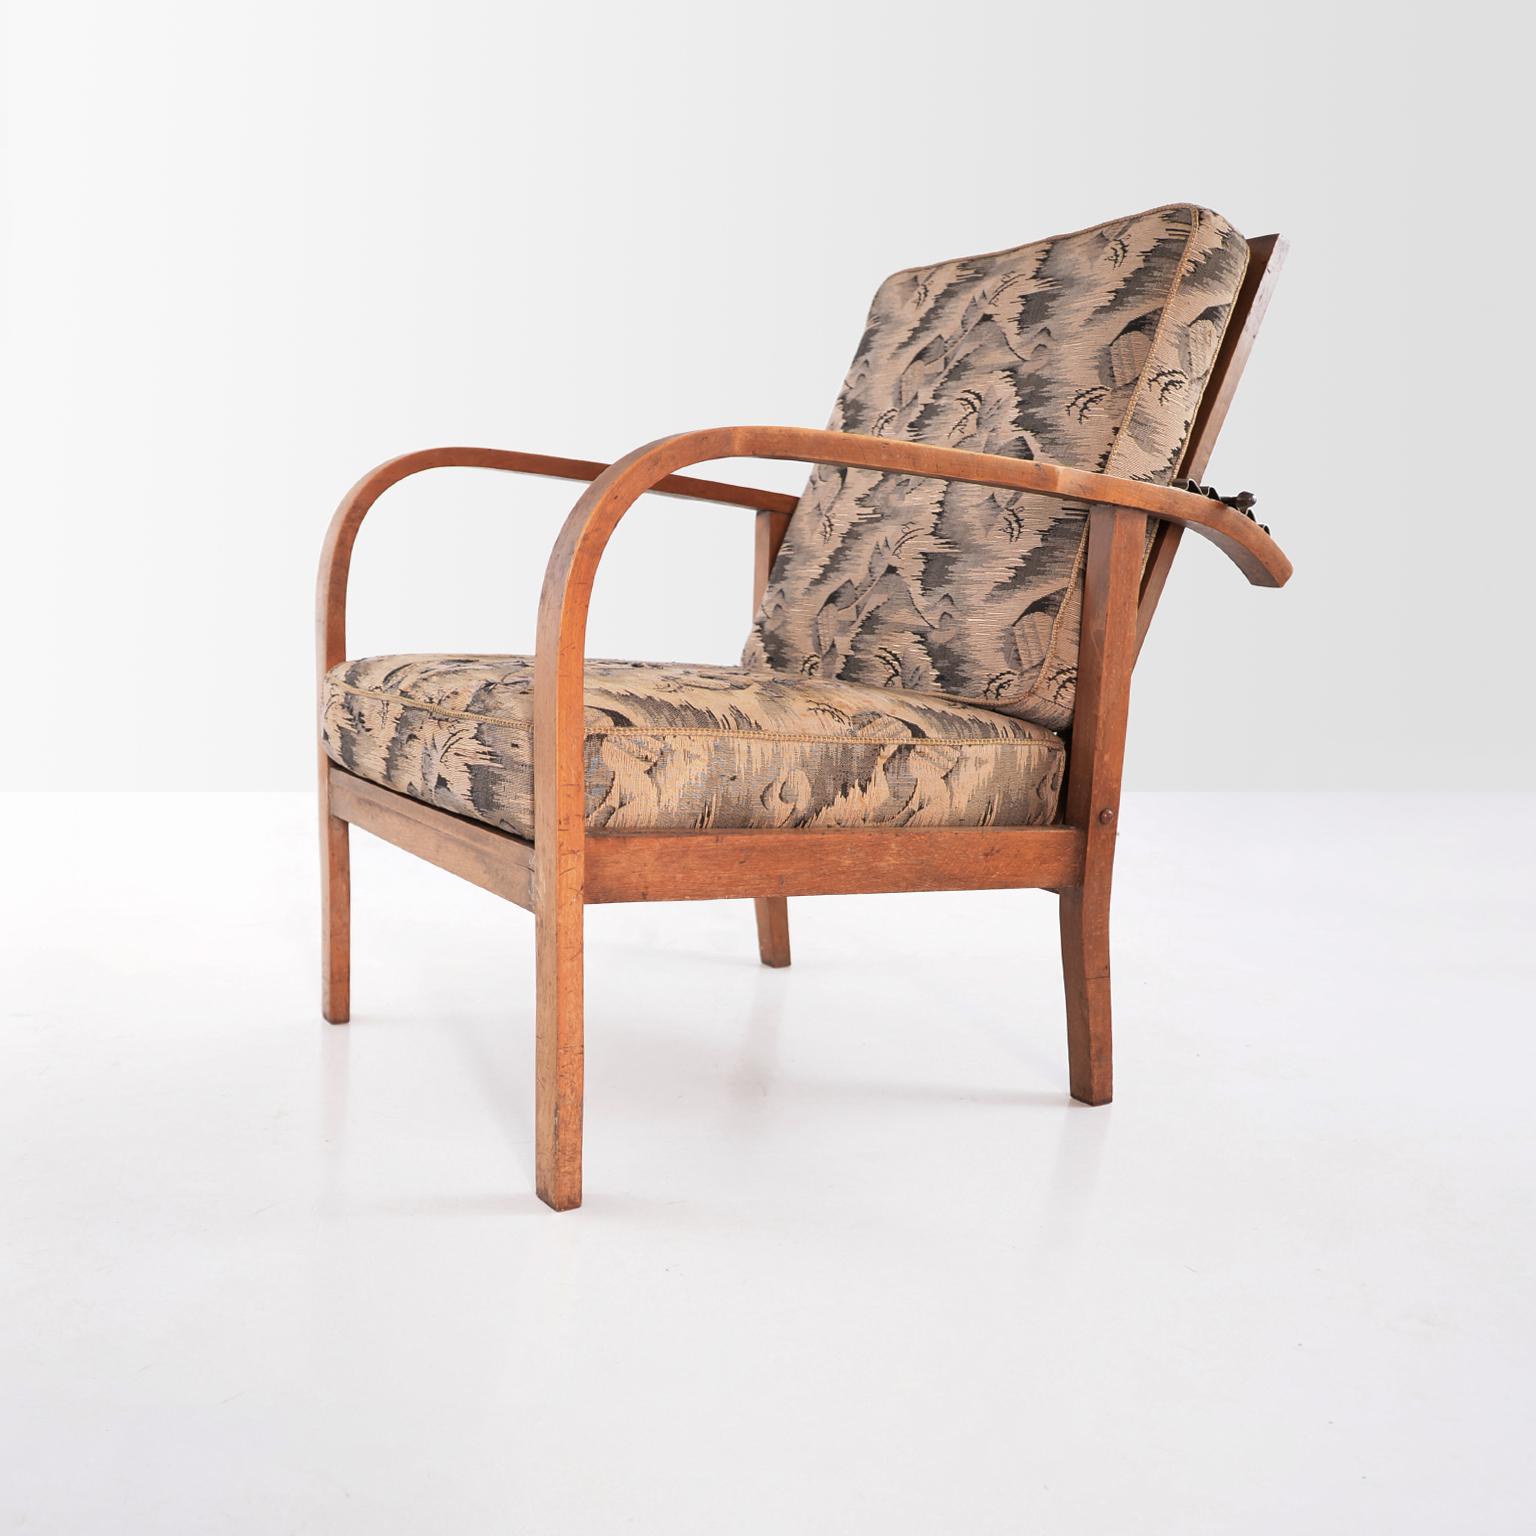 Hand-Crafted Pair of Modernist Wooden Armchairs by Jan Vaněk, Original Upholstery, circa 1935 For Sale